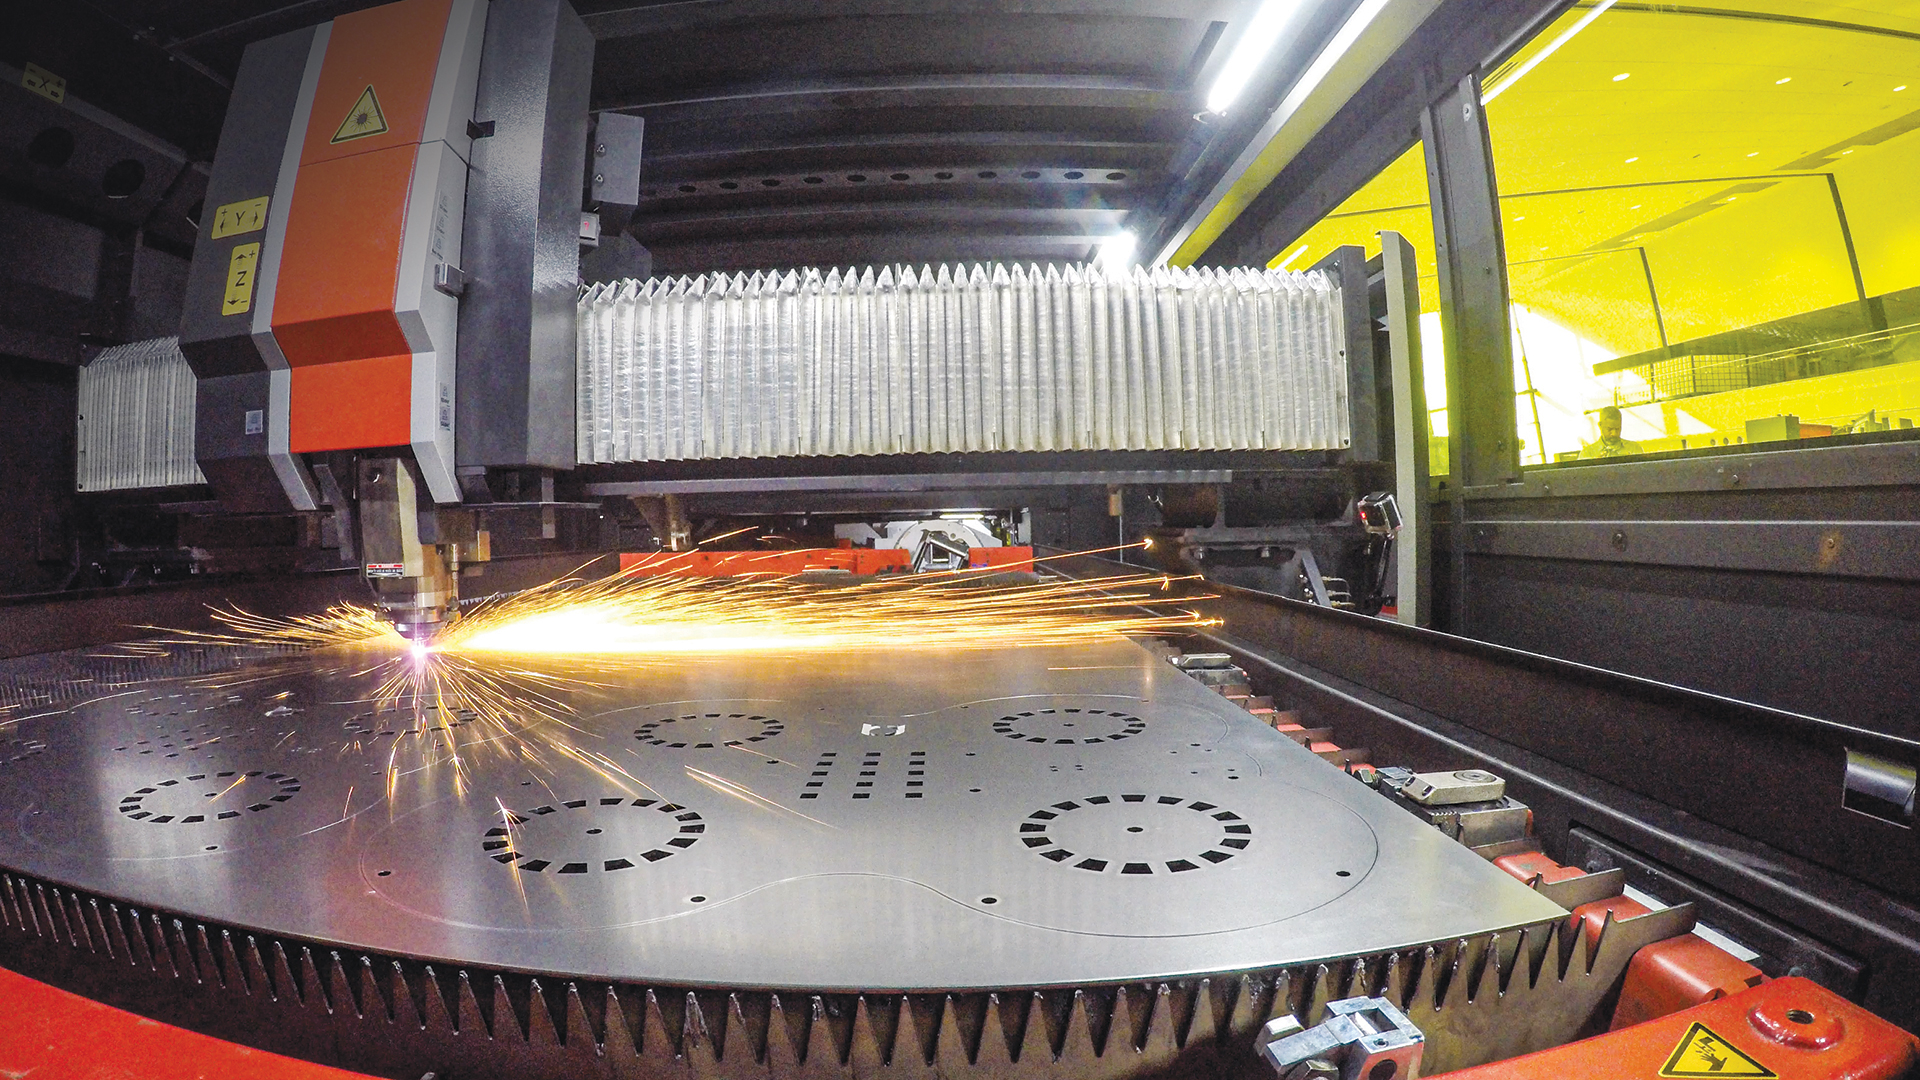 Amada’s ENSIS RI platform can cut up to 1" (25.4-mm) plate.